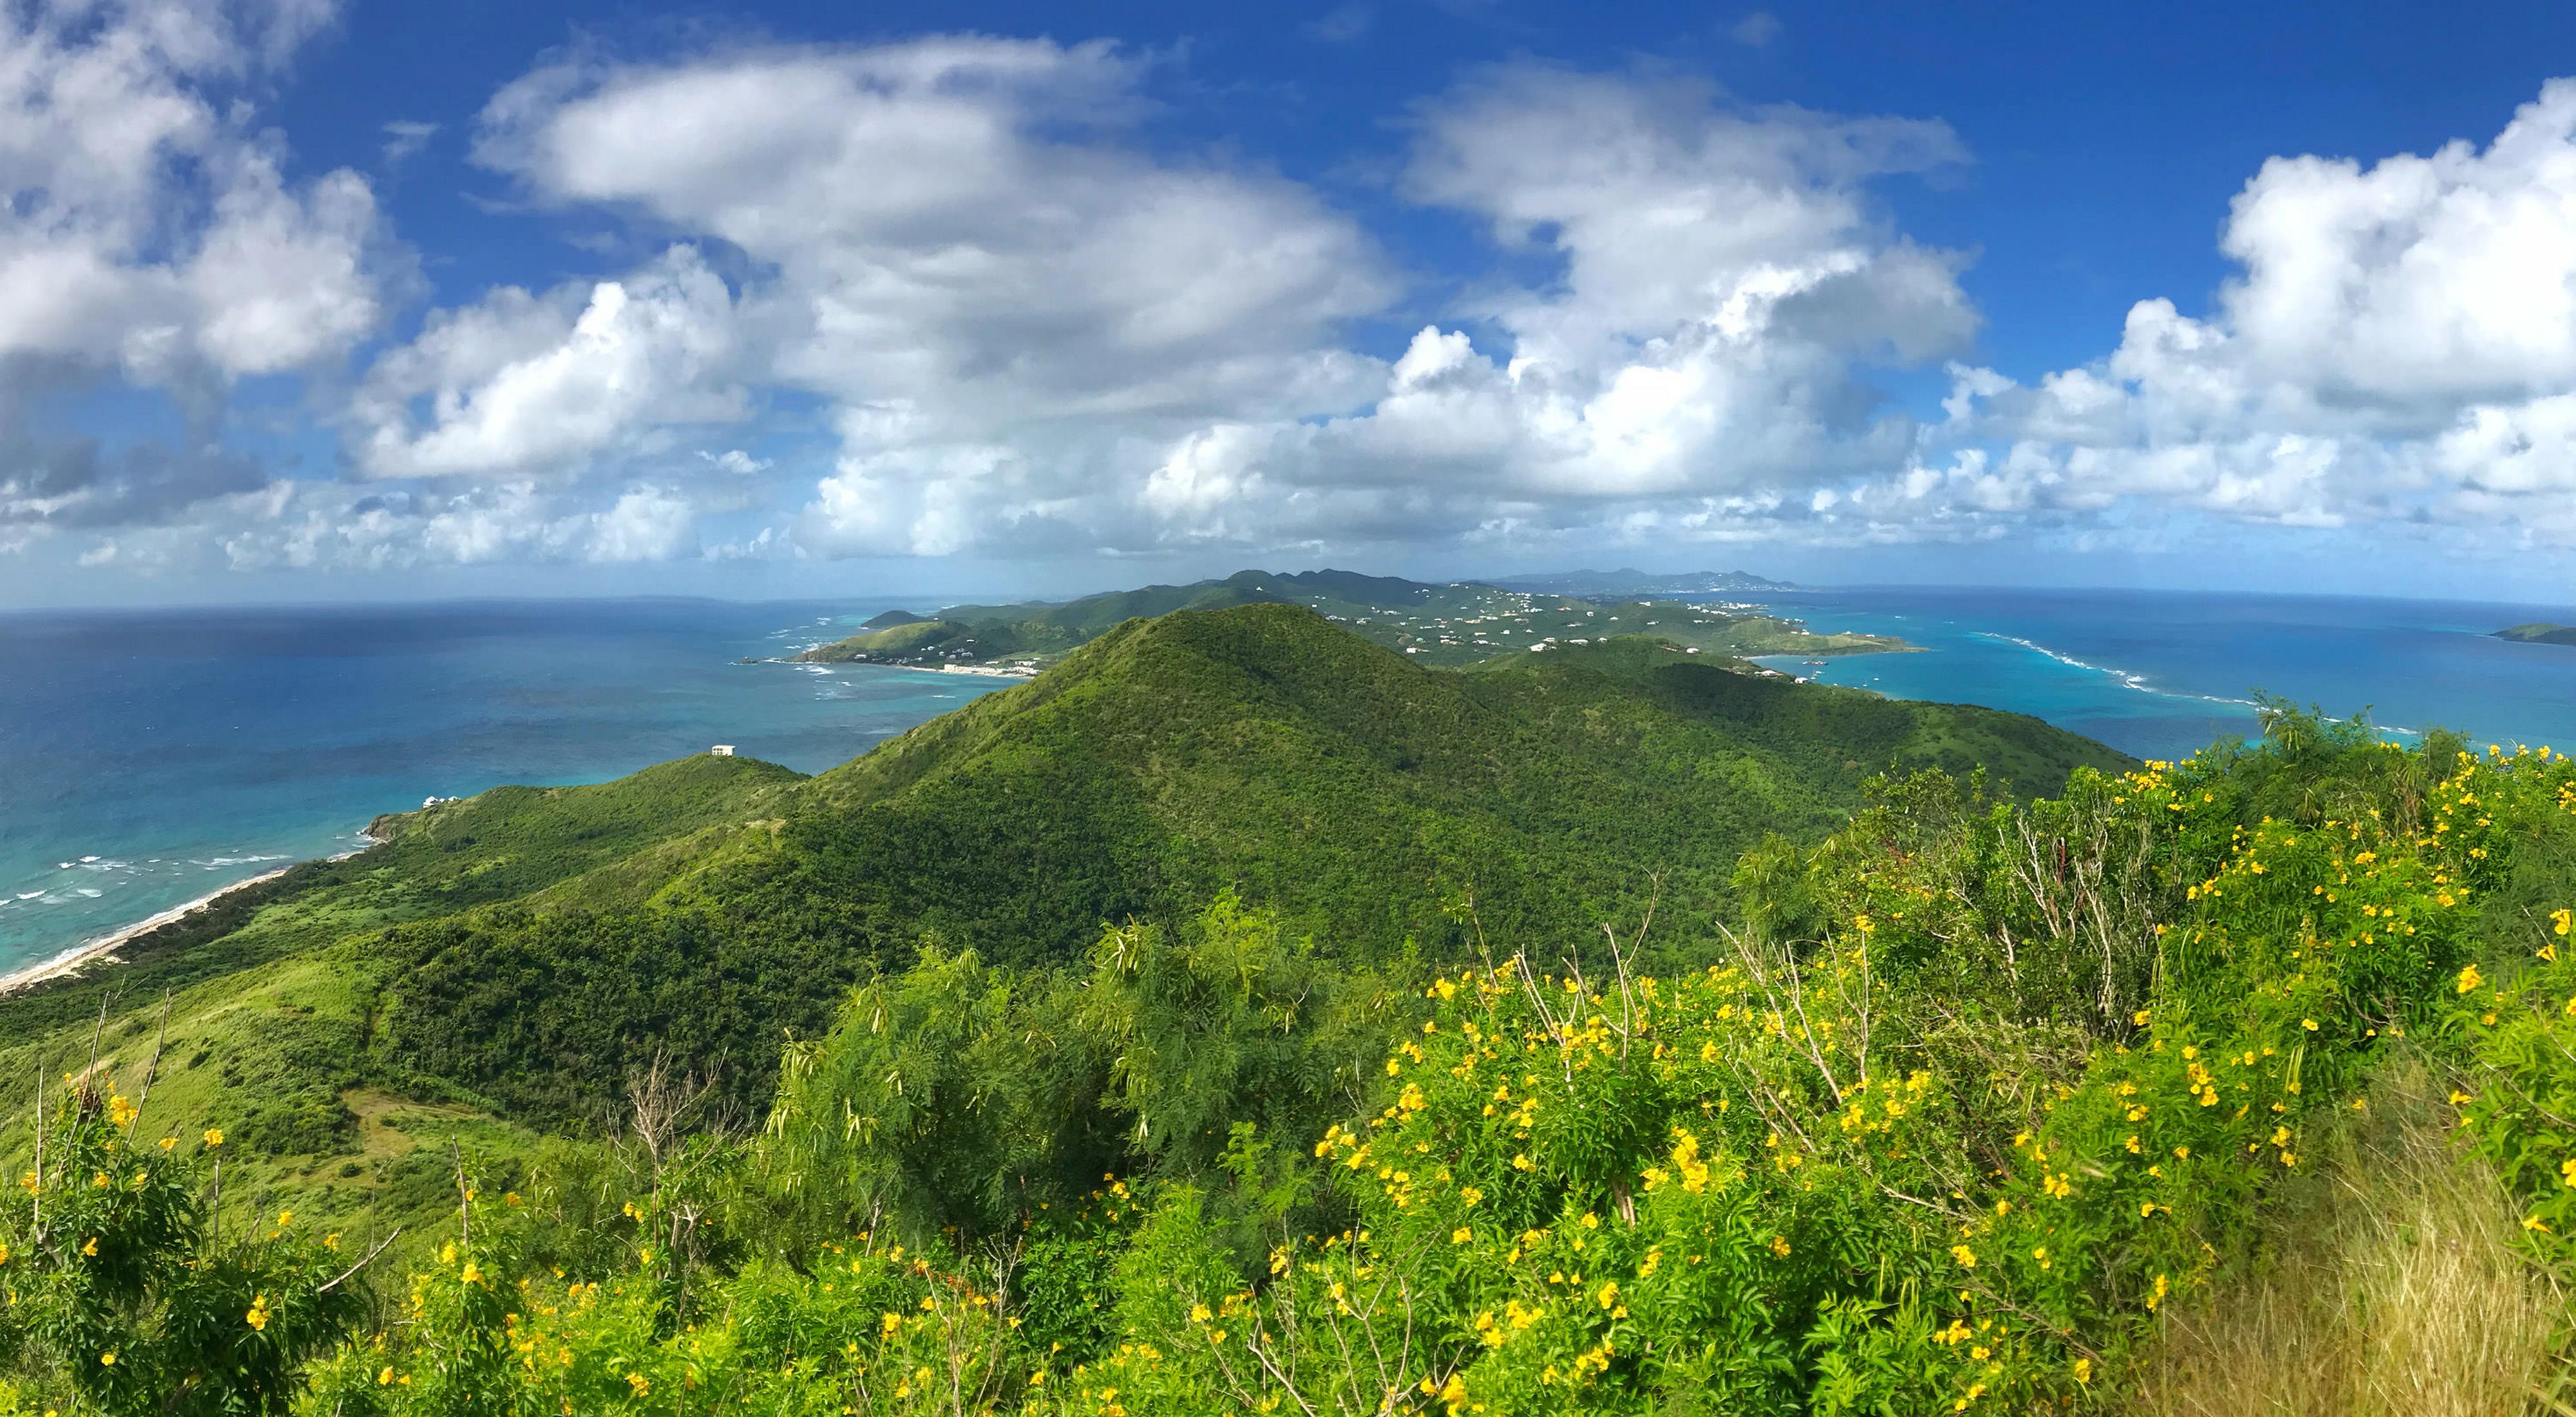 View from a St. Croix hilltop